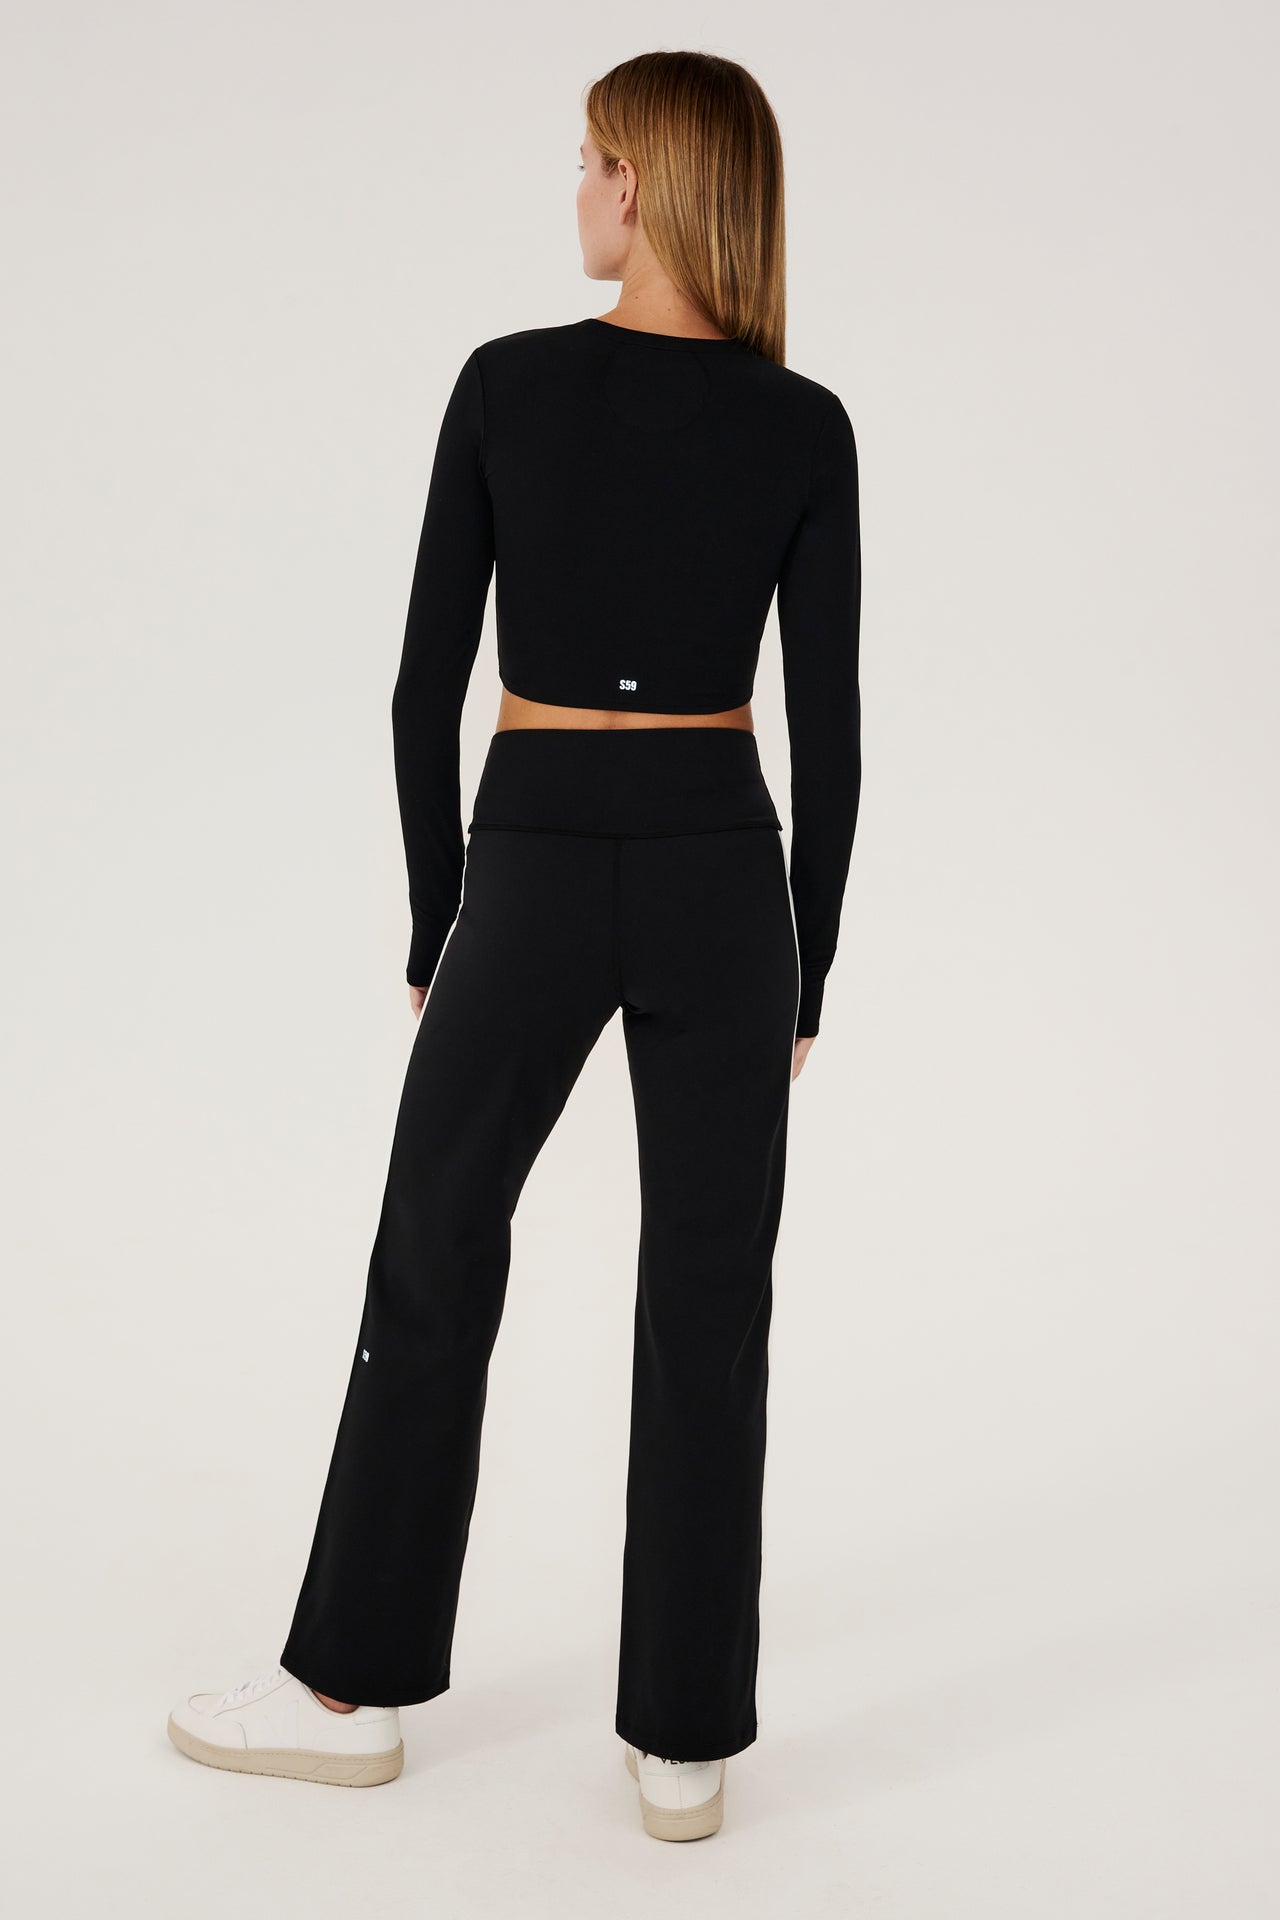 The back view of a woman wearing a SPLITS59 Harper Supplex Pant in Black/White and leggings with a side stripe.